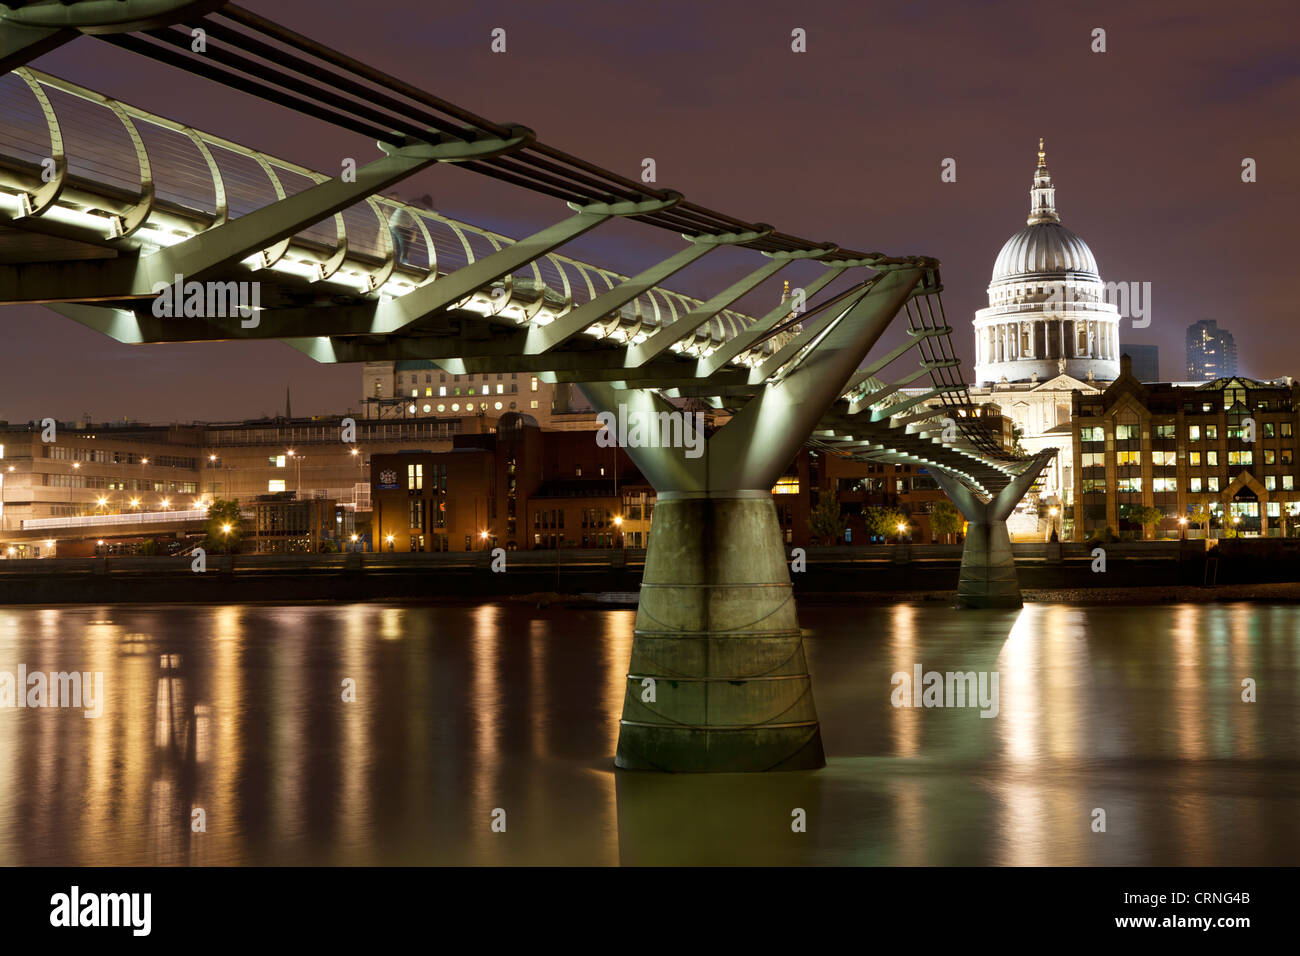 The Millennium Bridge spanning the River Thames between Bankside on the South Bank and St Paul's Cathedral on the North Bank. Stock Photo